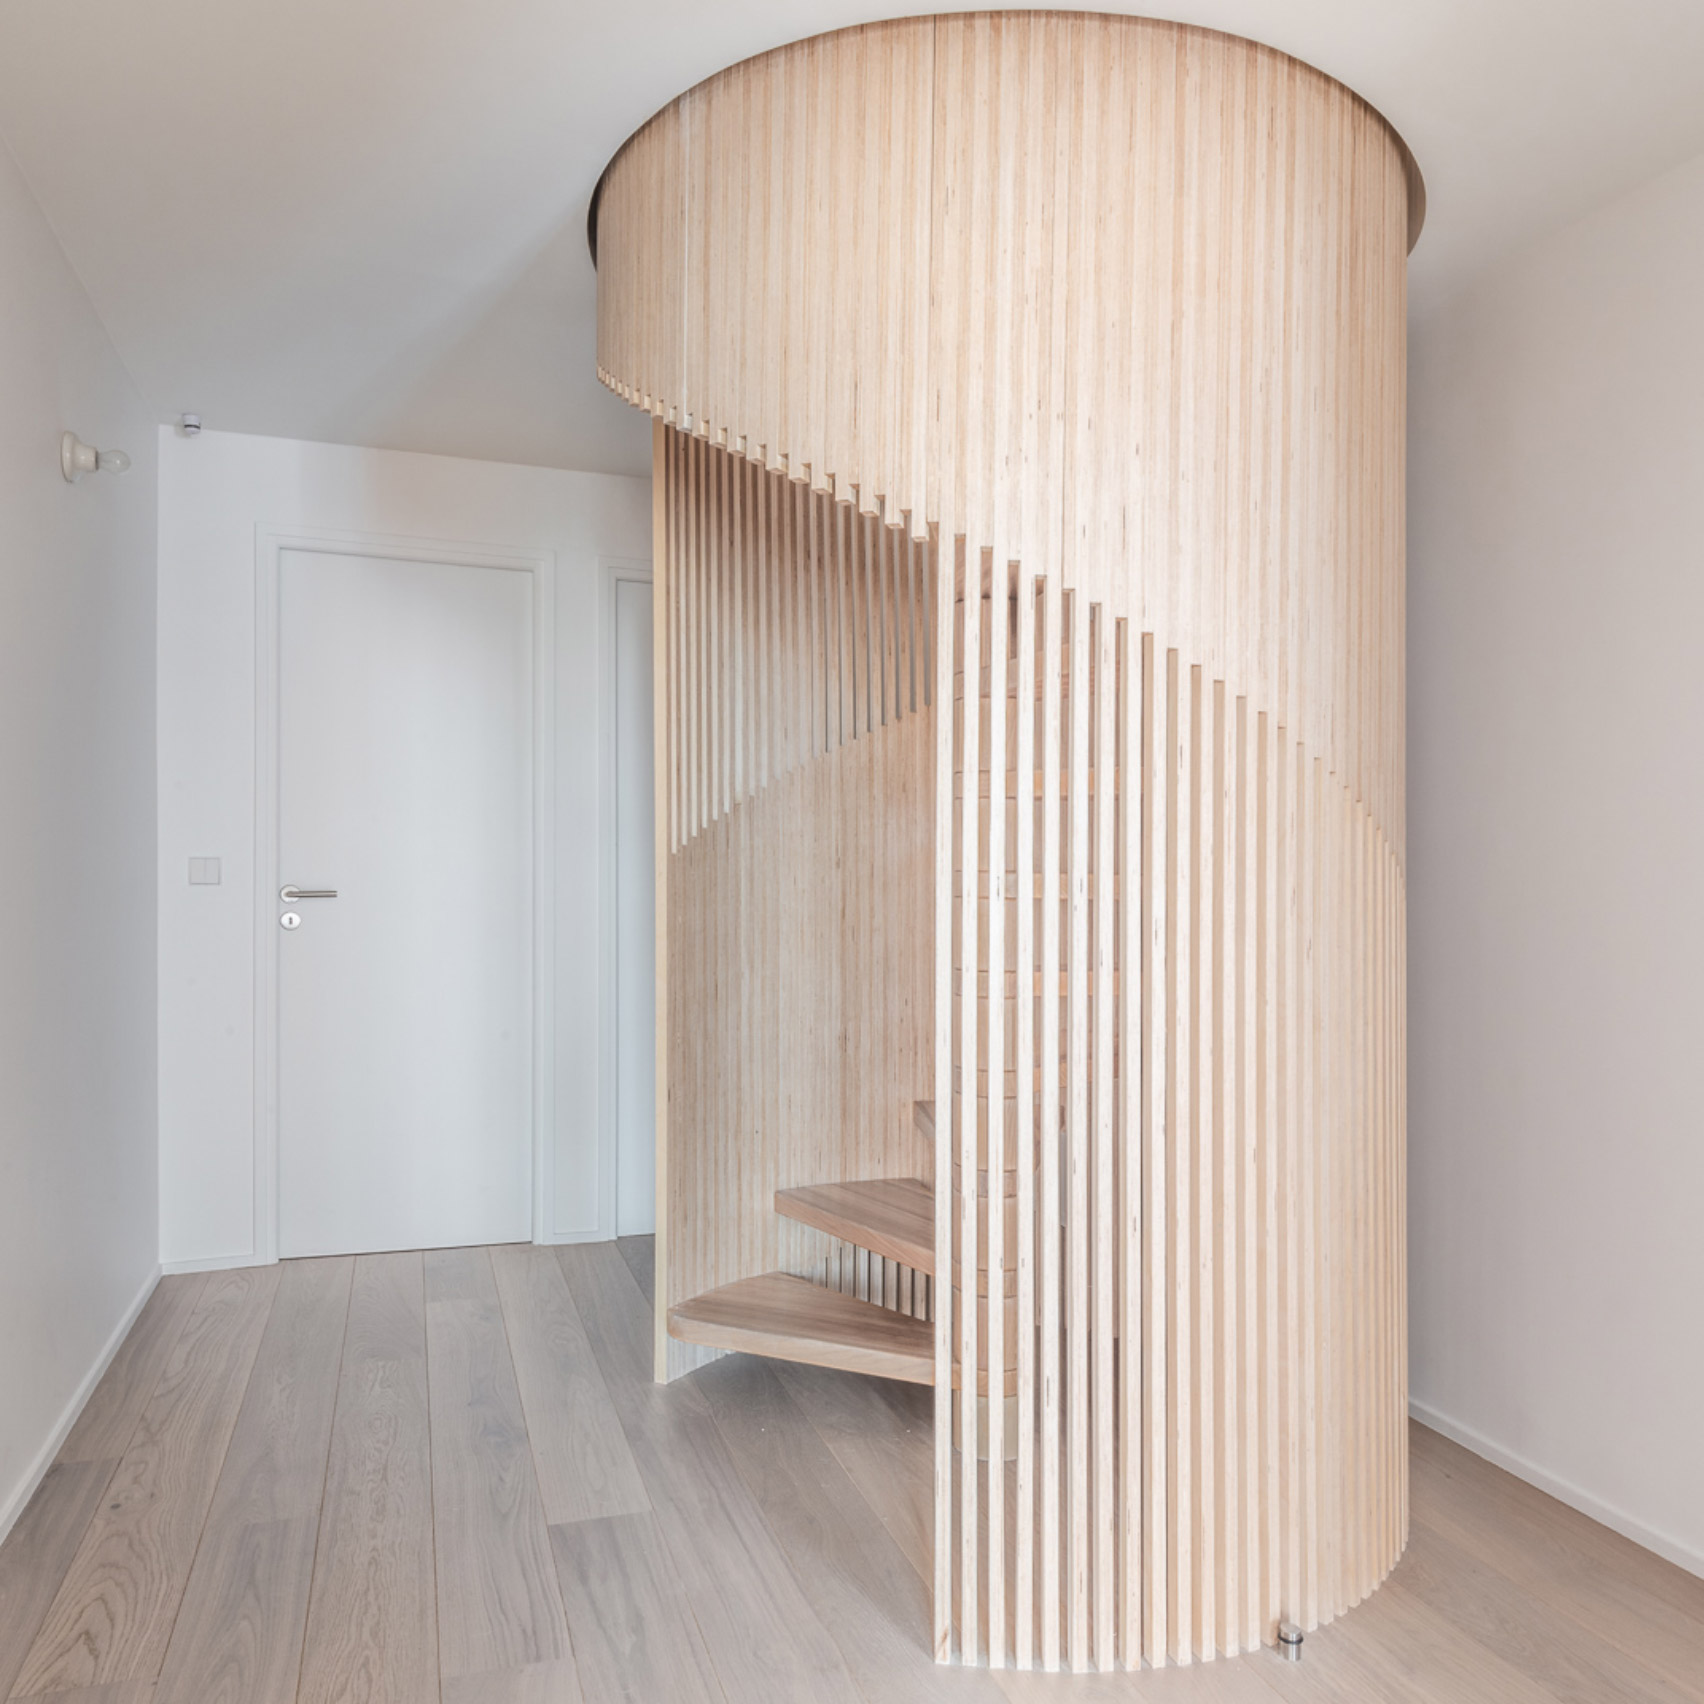 Dezeen's top 10 staircases of 2019: Sacha, France, by SABO Project